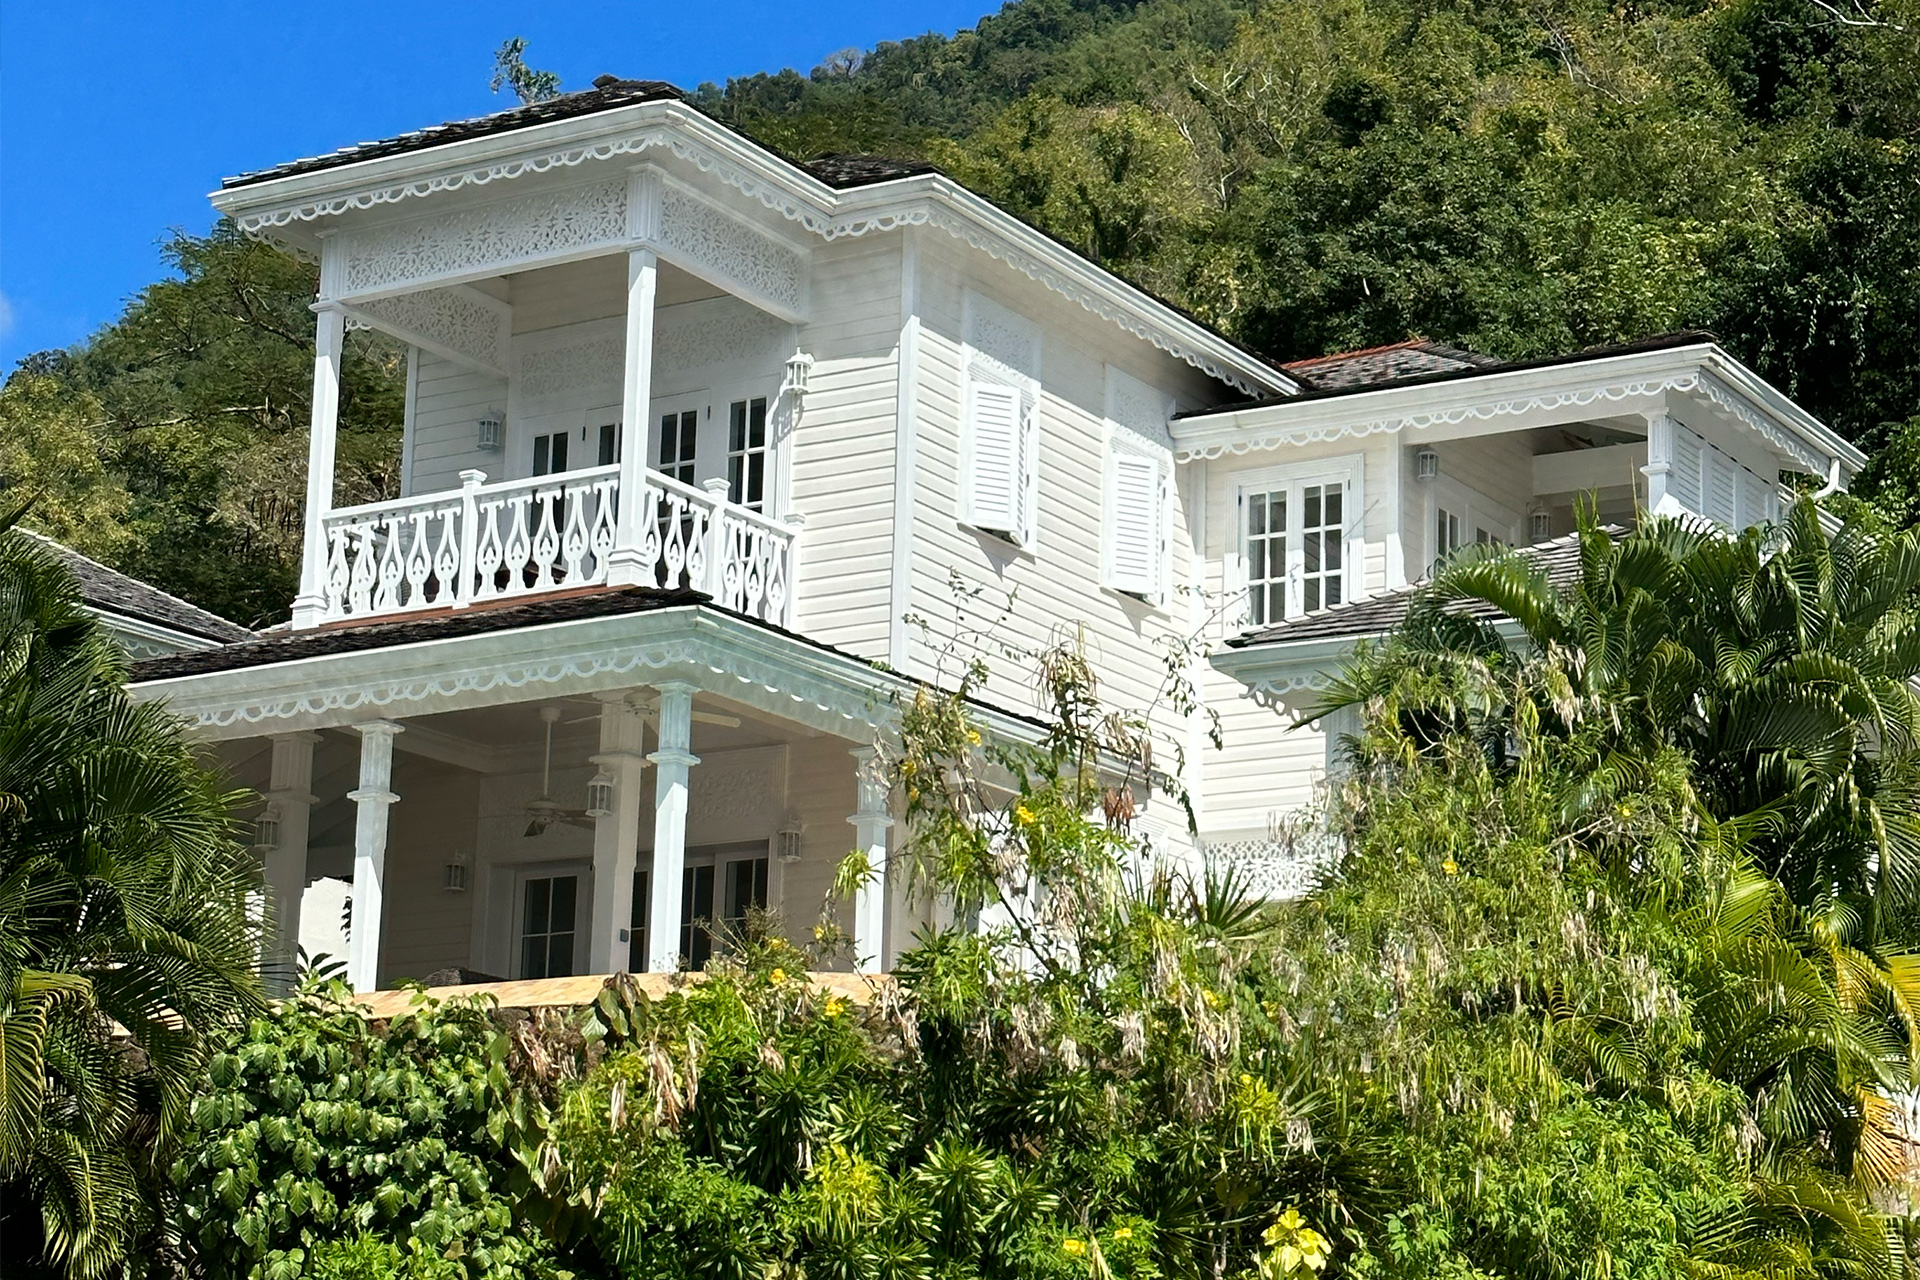 View of house